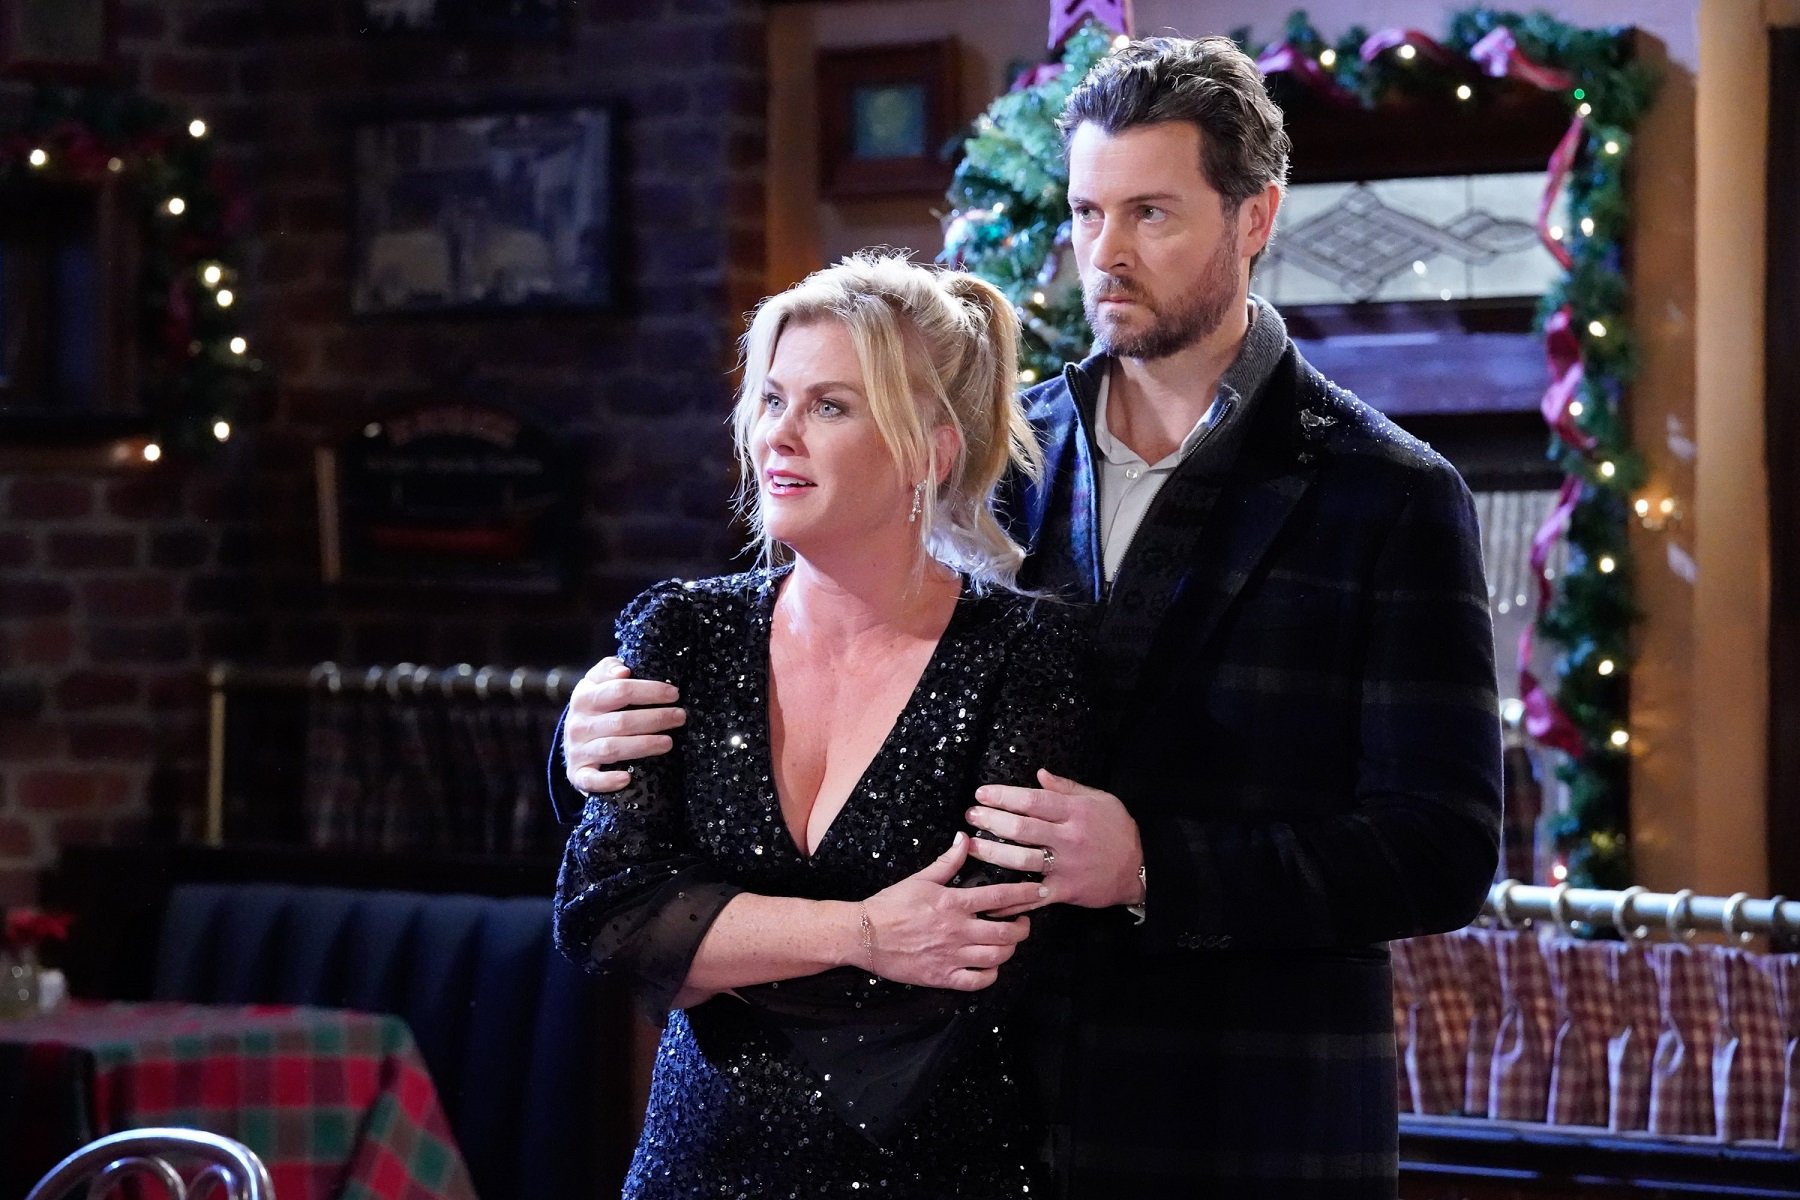 Days of Our Lives sneak peek focuses on Sami and EJ, both pictured here in black outfits